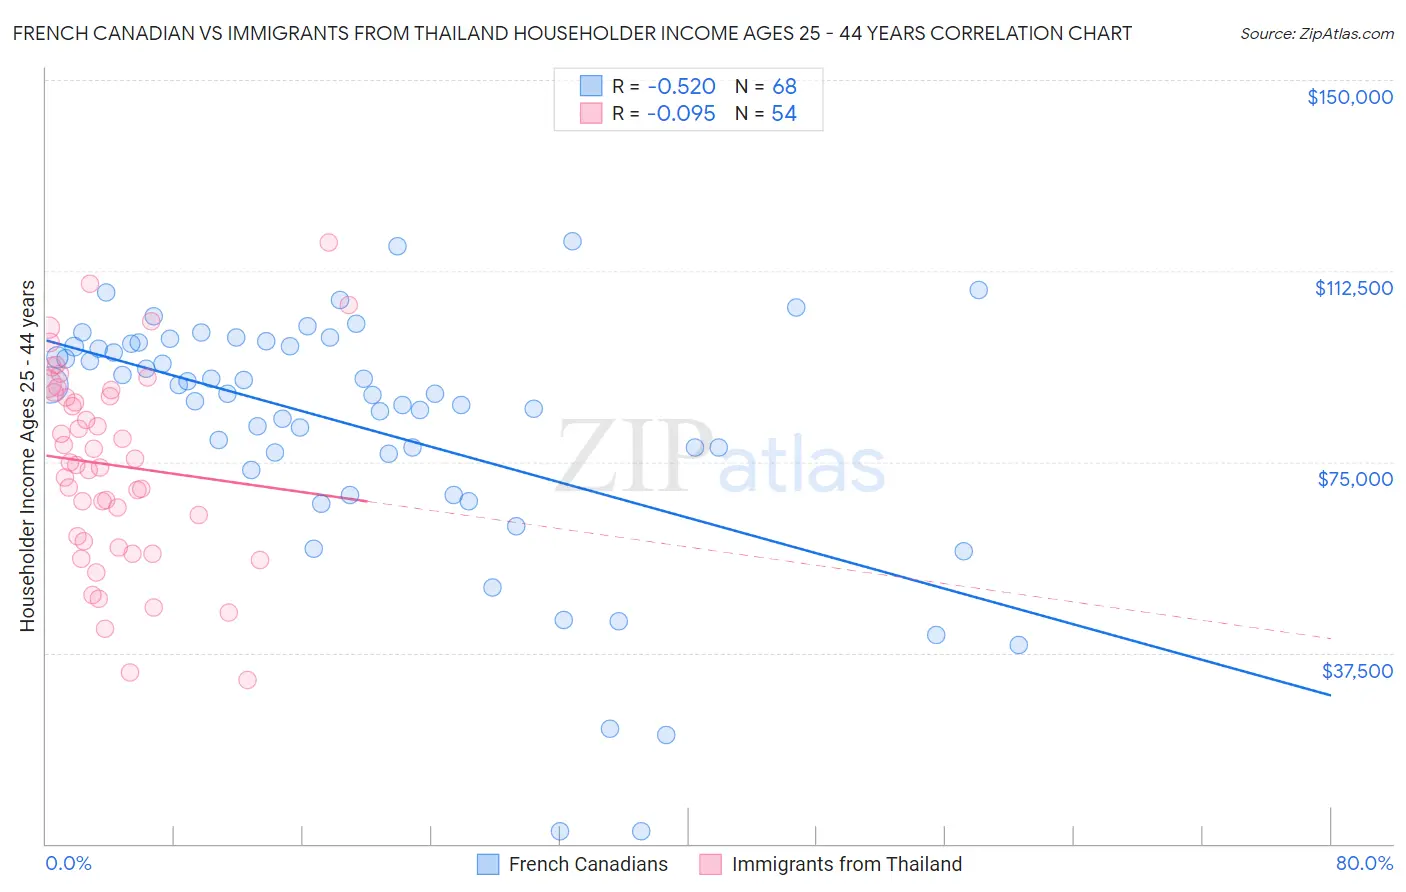 French Canadian vs Immigrants from Thailand Householder Income Ages 25 - 44 years